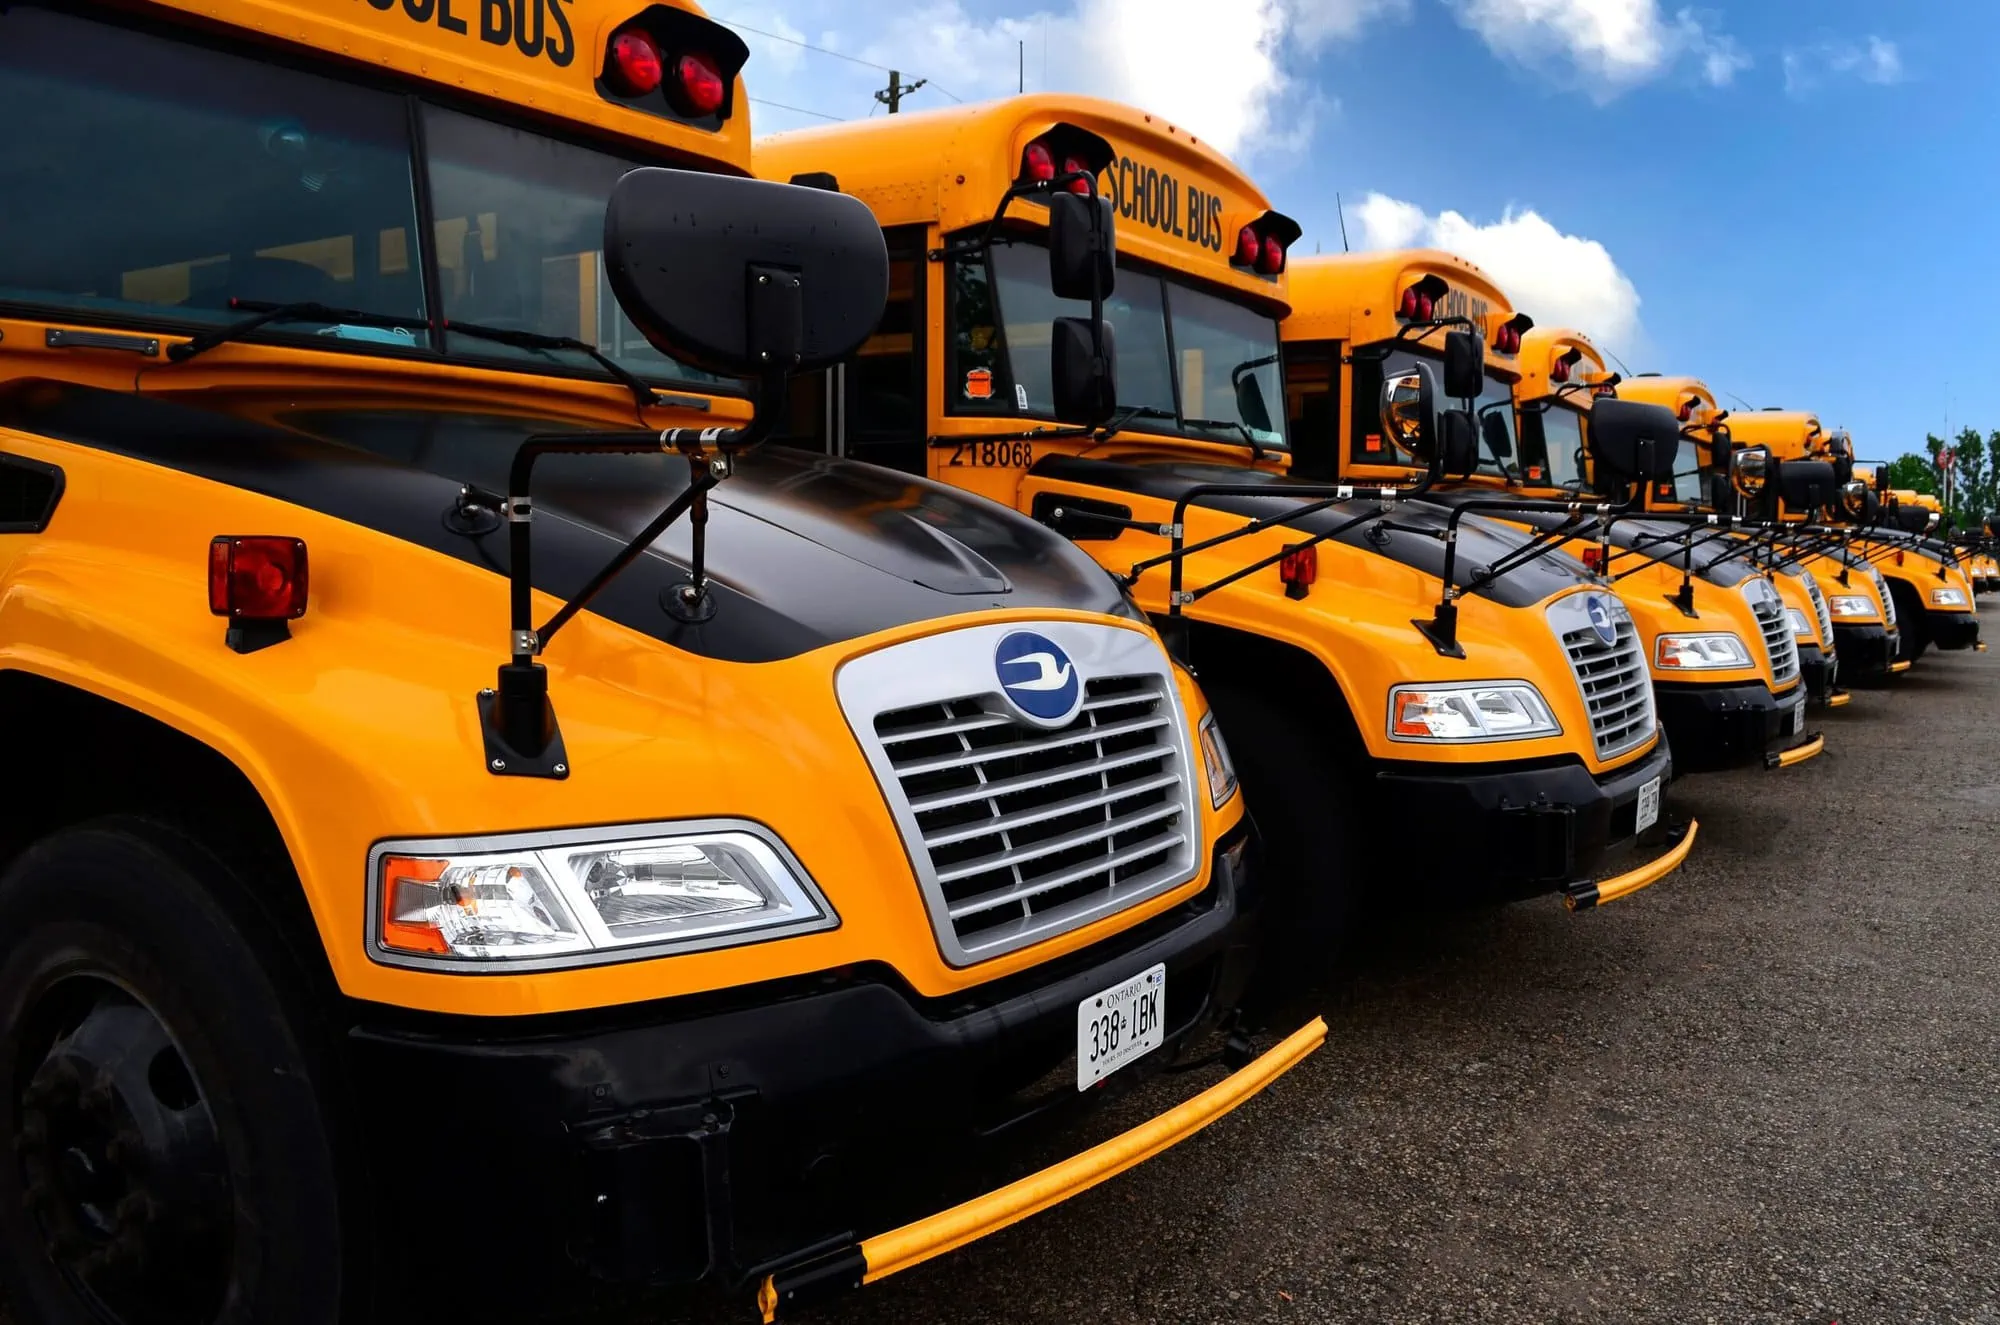 Row of 5+ school buses monitored after school district leaders researched do dash cams record when car is off